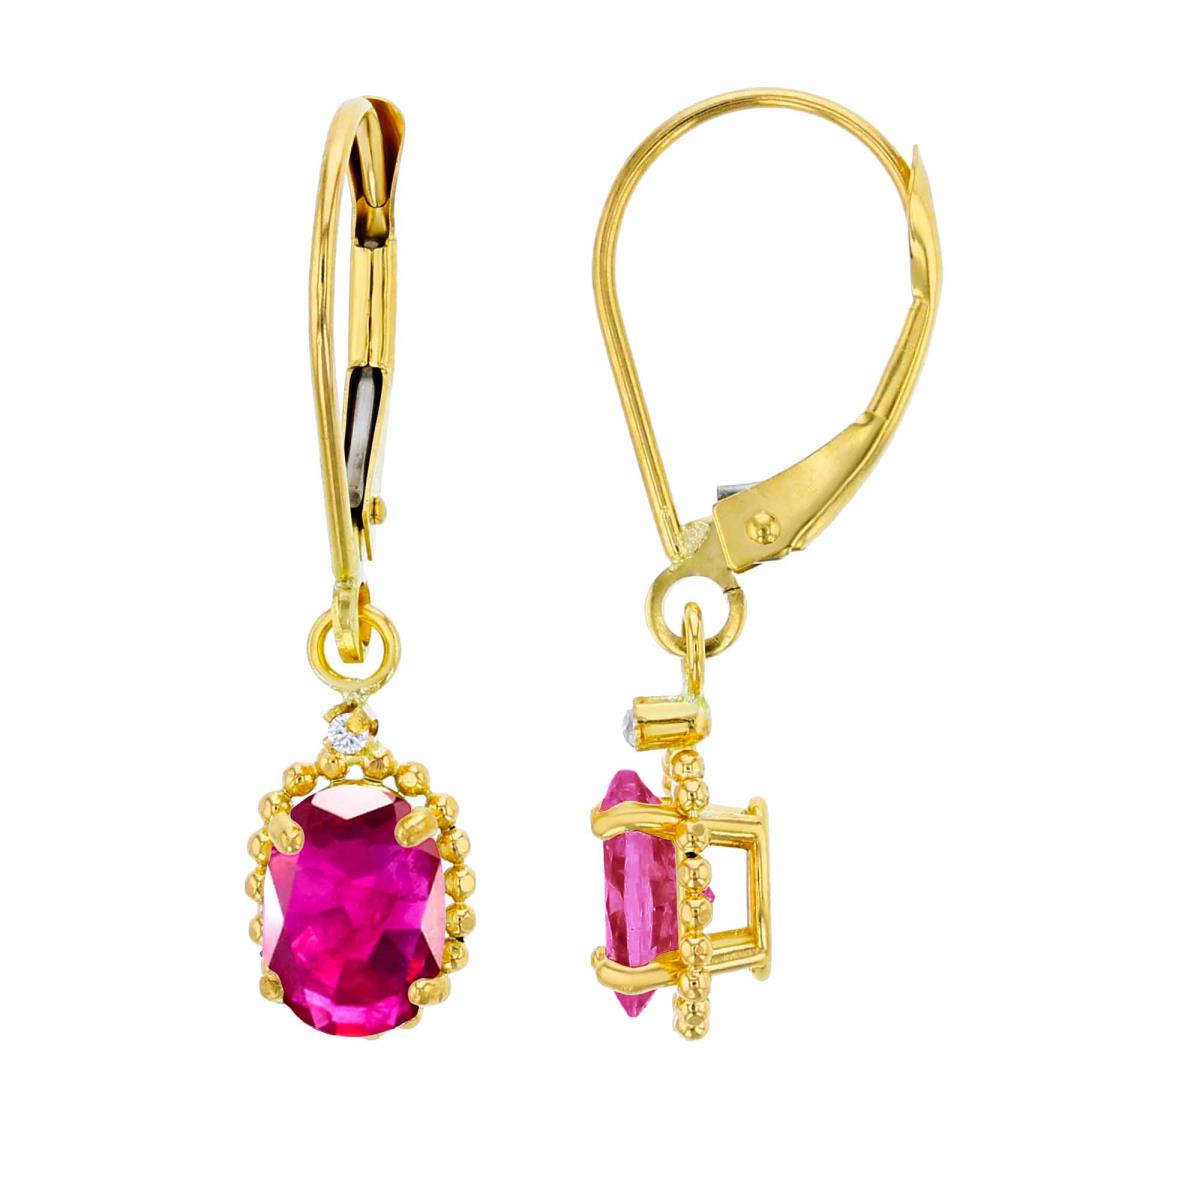 10K Yellow Gold 1.25mm Rd White Topaz & 6x4mm Ov Glass Filled Ruby Bead Frame Drop Lever-Back Earring